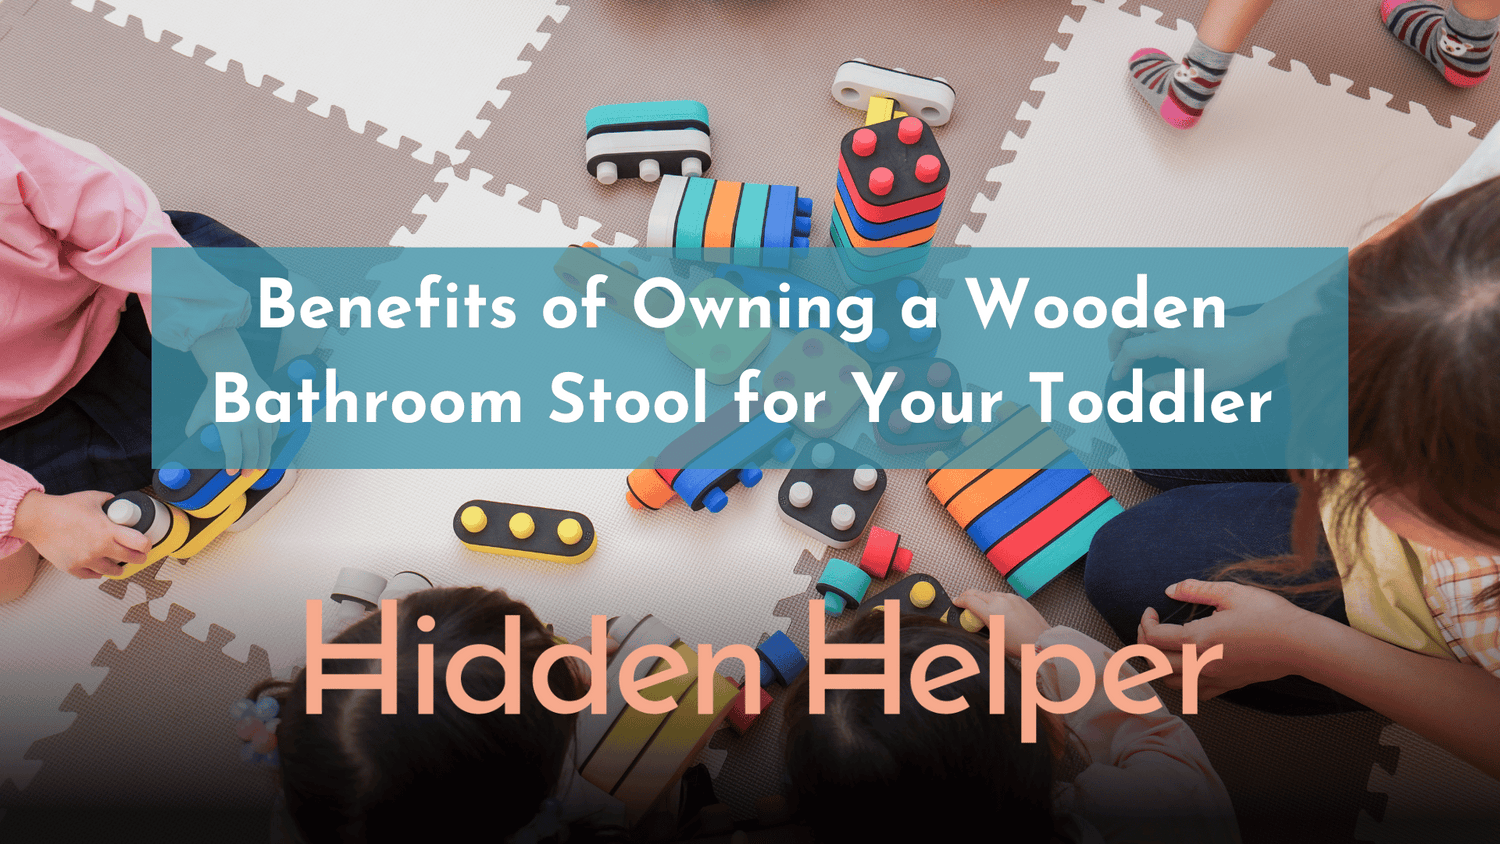 Benefits of Owning a Wooden Bathroom Stool for Your Toddler